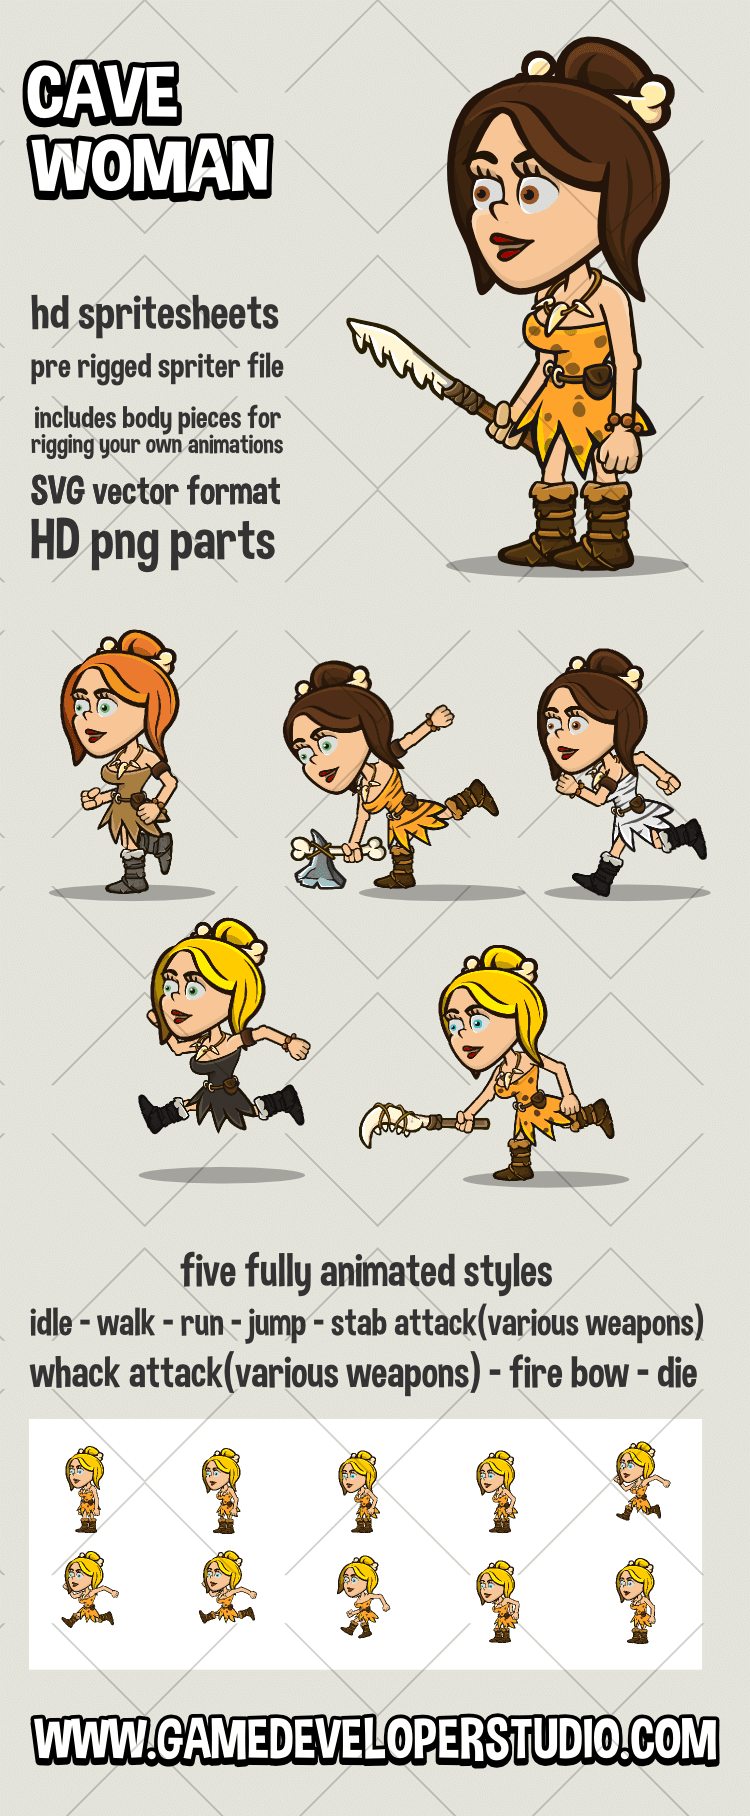 Animated cave woman game sprite